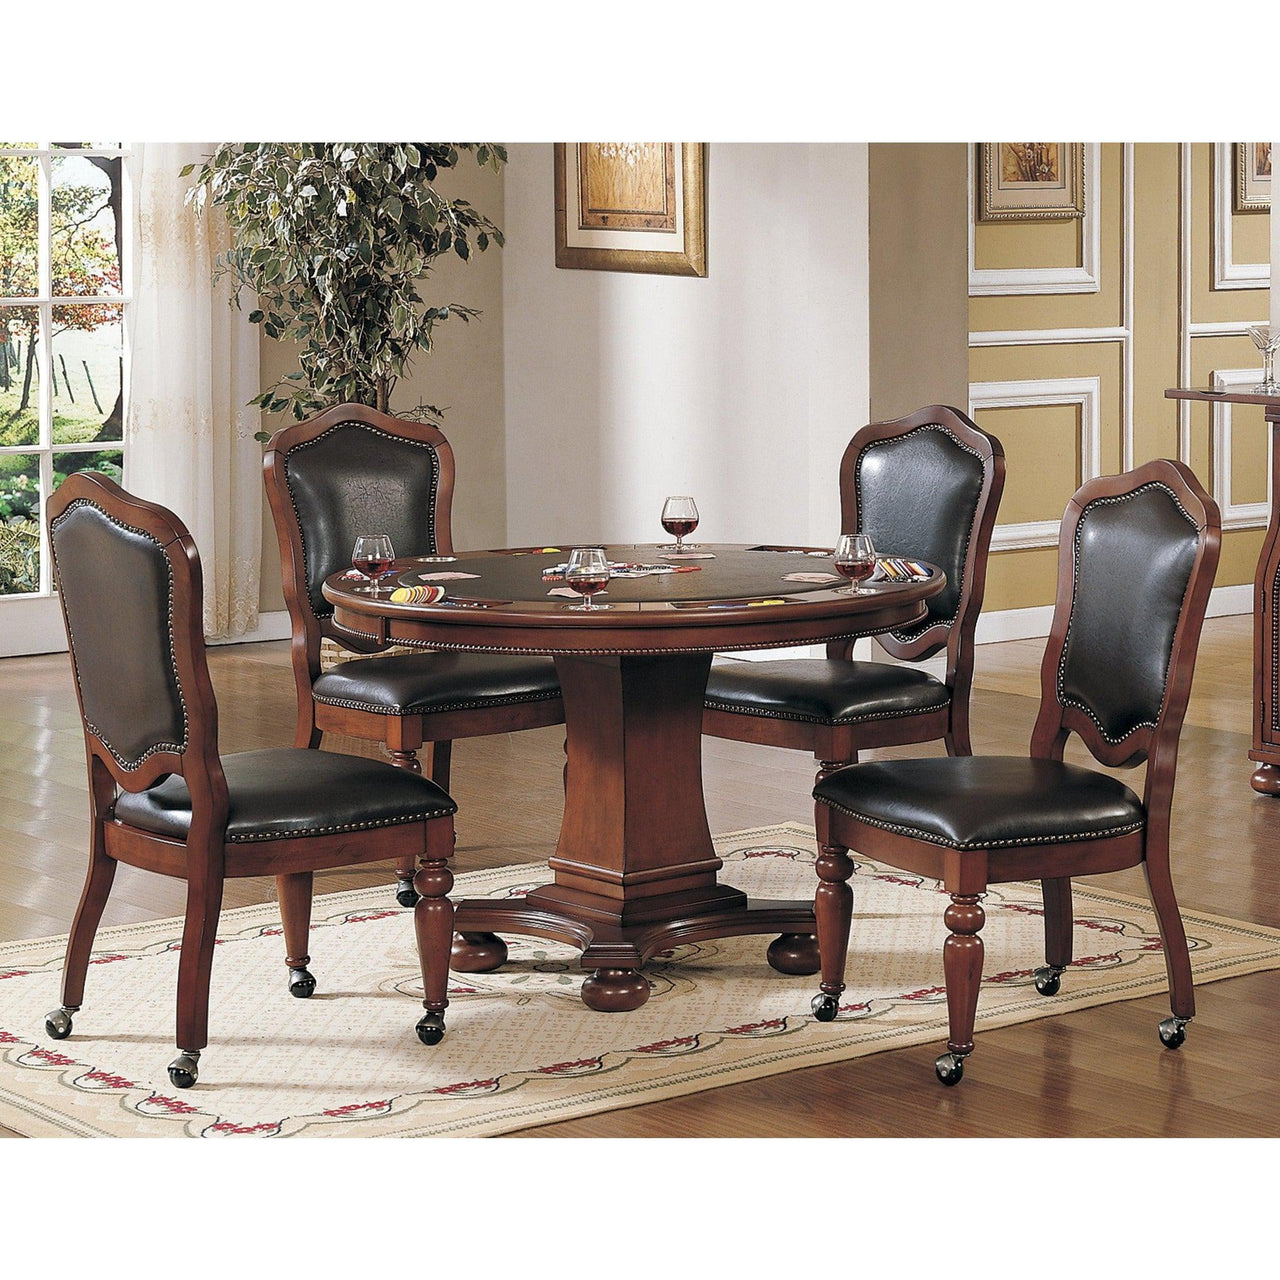 Convertible Poker & Dining Table Set Bellagio With matching chairs-AMERICANA-POKER-TABLES